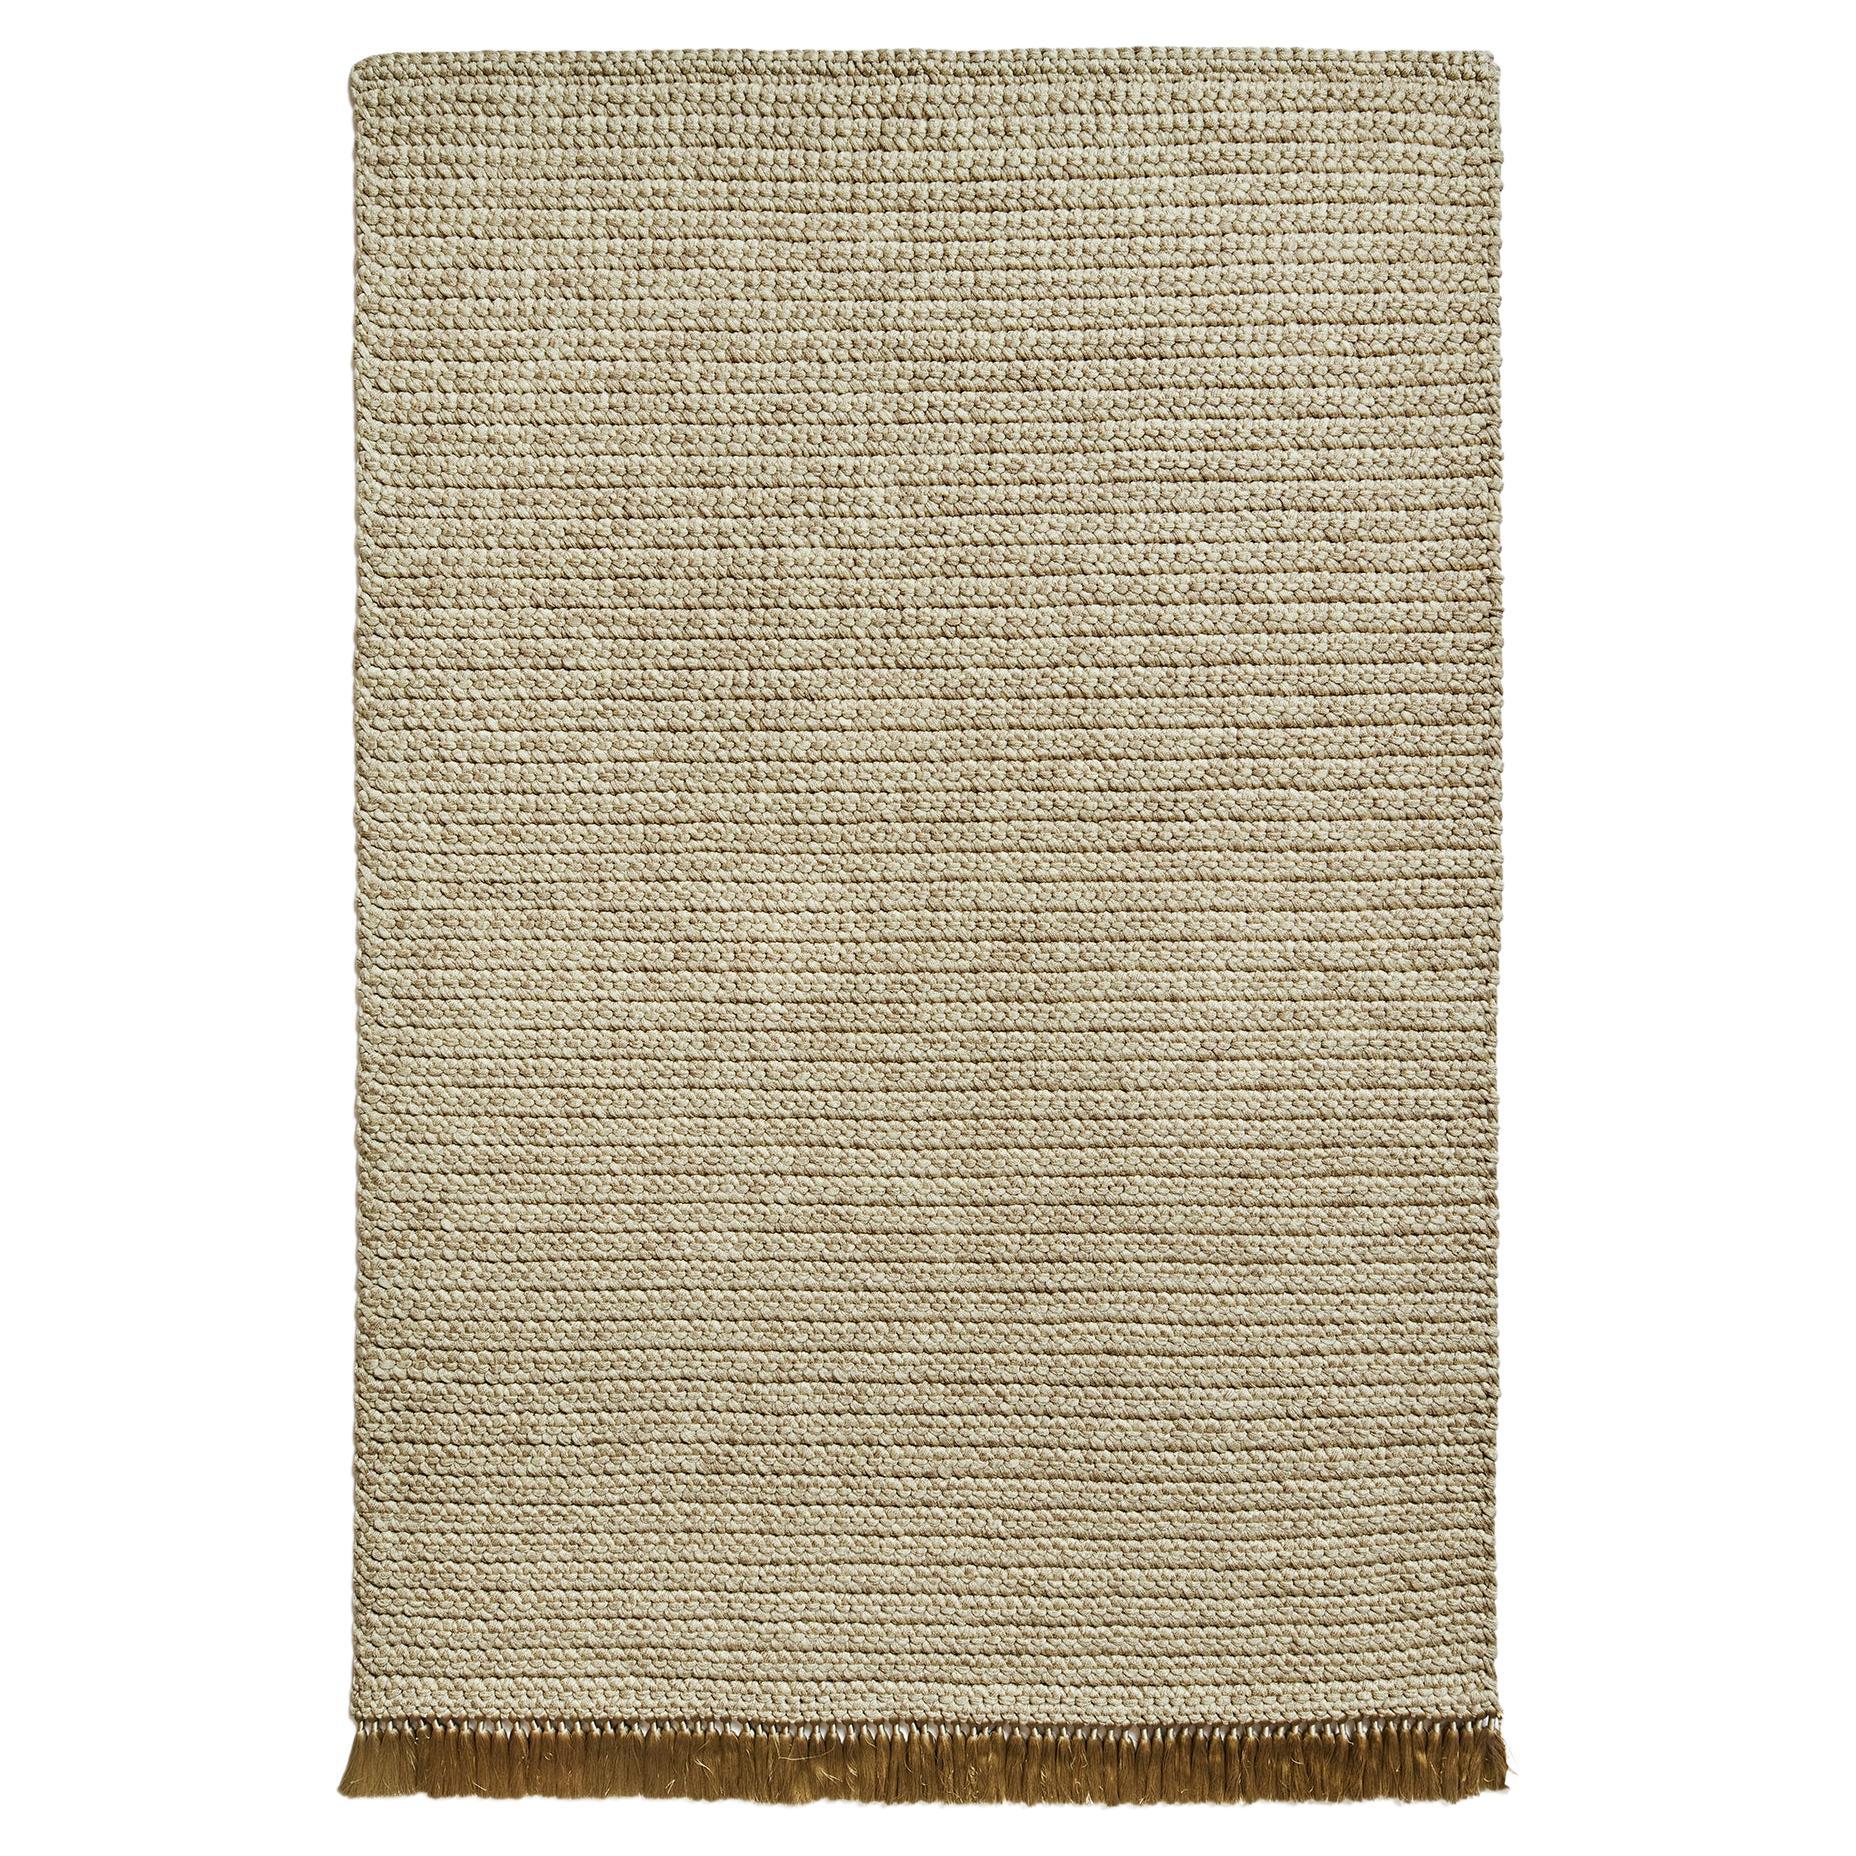 Handmade Crochet Thick Rug 170X240 cm in Beige - Sand & Cacao Colors For Sale